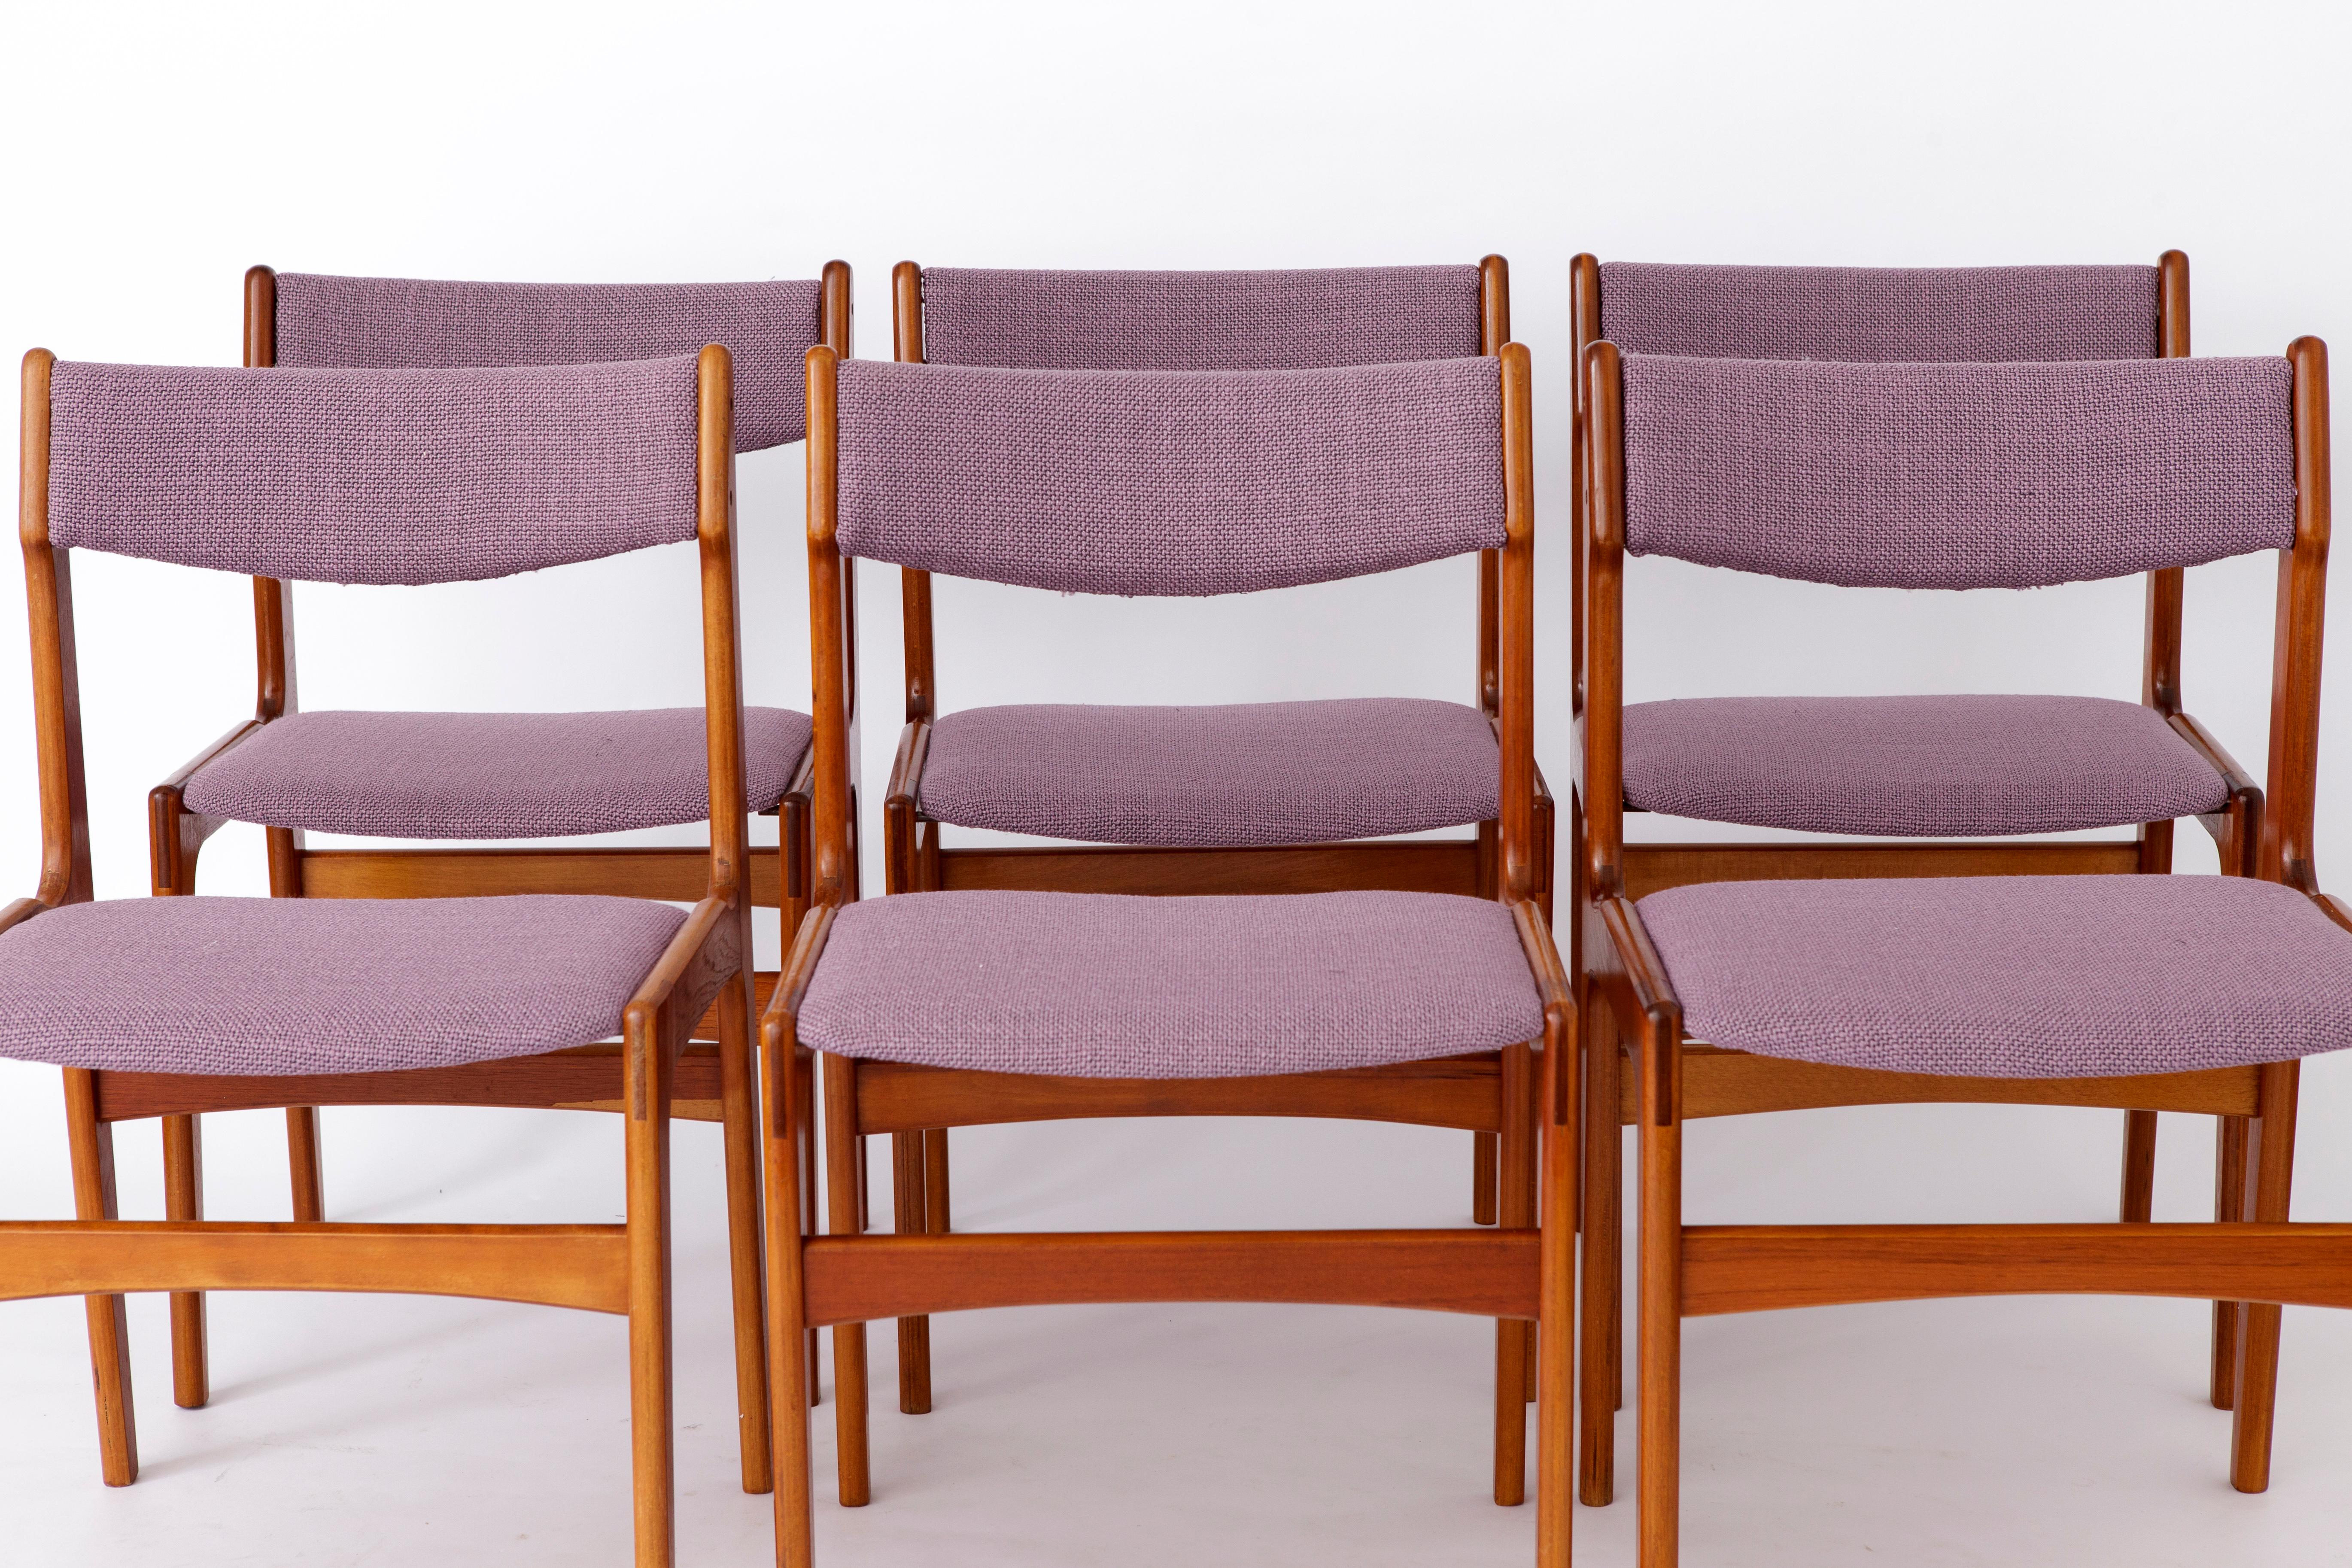 Set of 6 vintage dining chairs from the 1960s. 
Unknown producer.  
Displayed price is for 6 chairs. 

Good condition of all chairs. 
Teak wood frames were refurbished and oiled. 
Seat and back covers were reupholstered with purple textile. 
Chairs